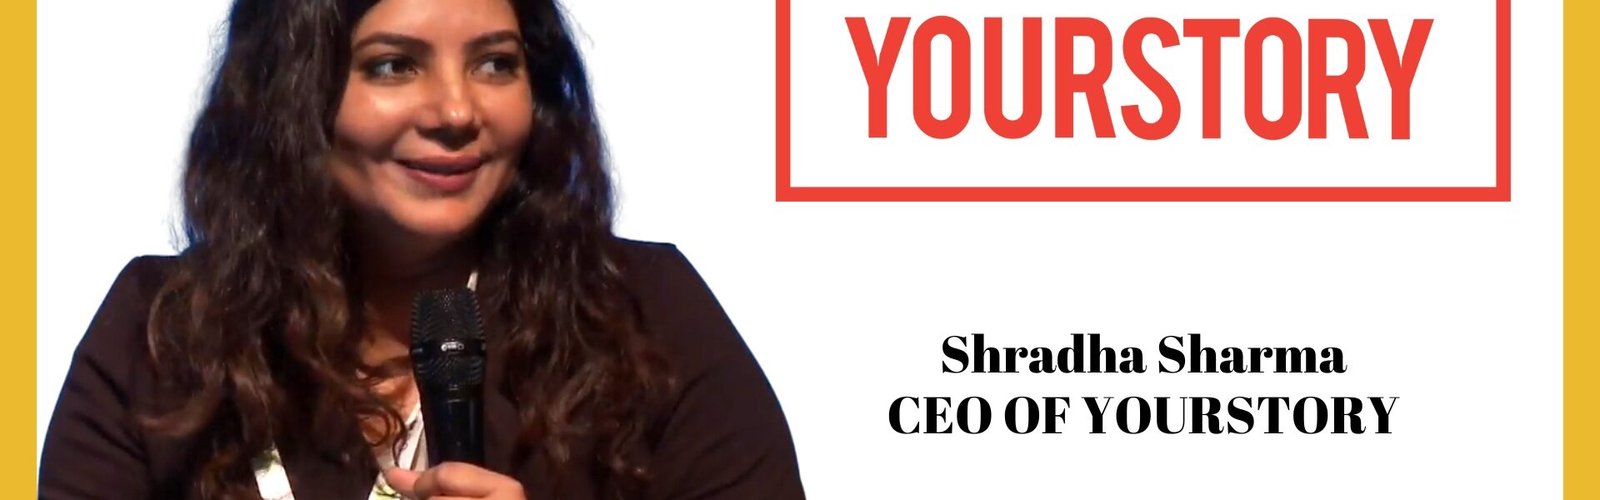 Biography Of Shradha Sharma Founder Of YourStory